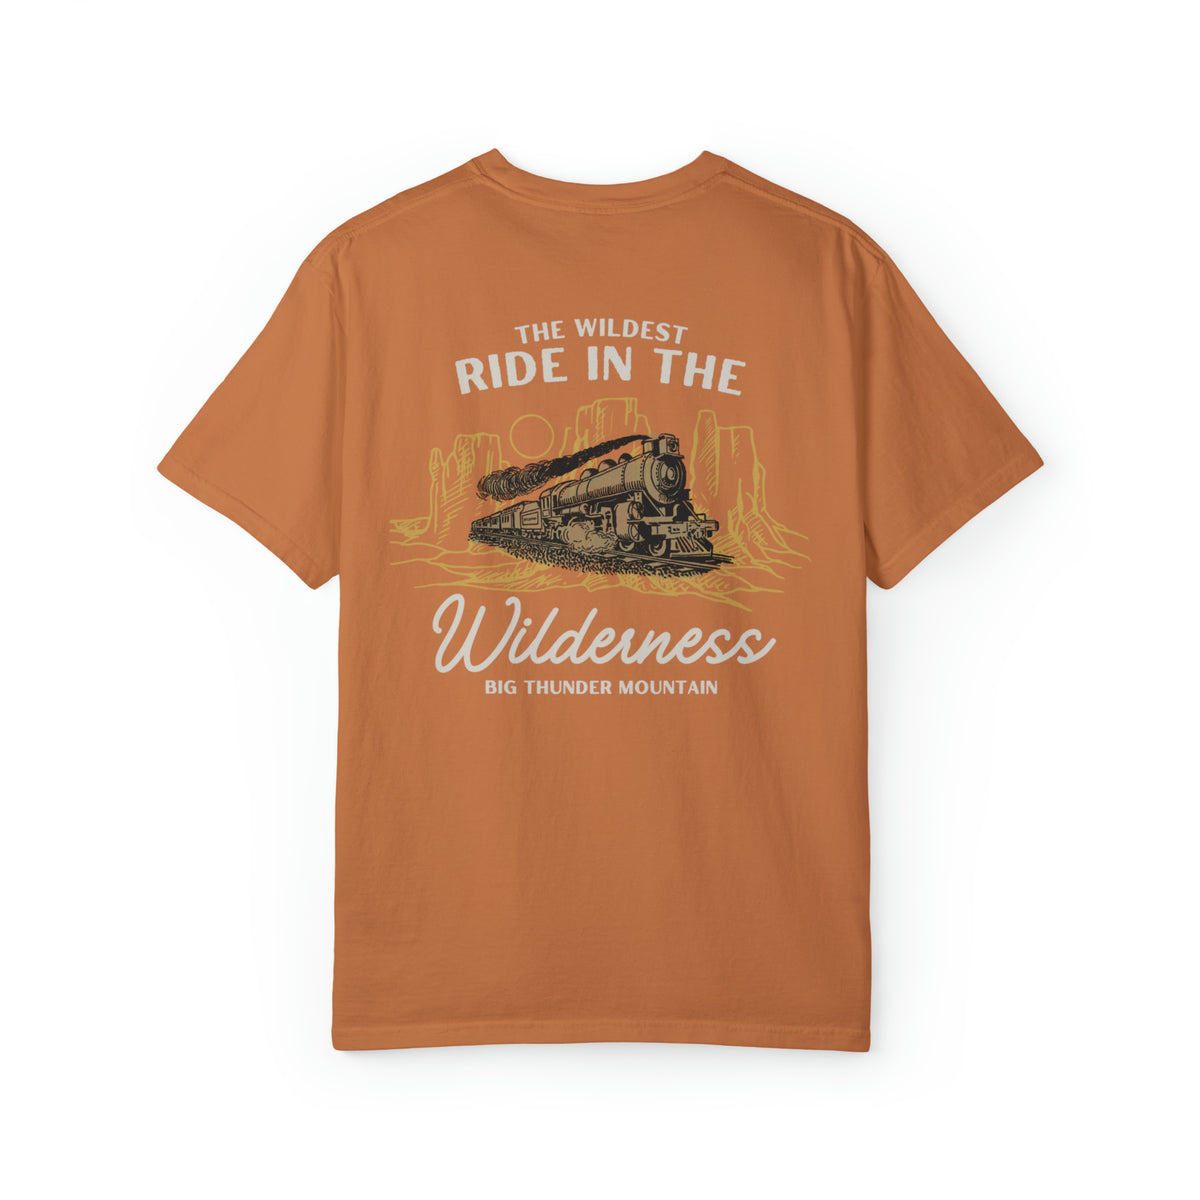 The Wildest Ride in the Wilderness Comfort Colors Unisex Garment-Dyed T-shirt